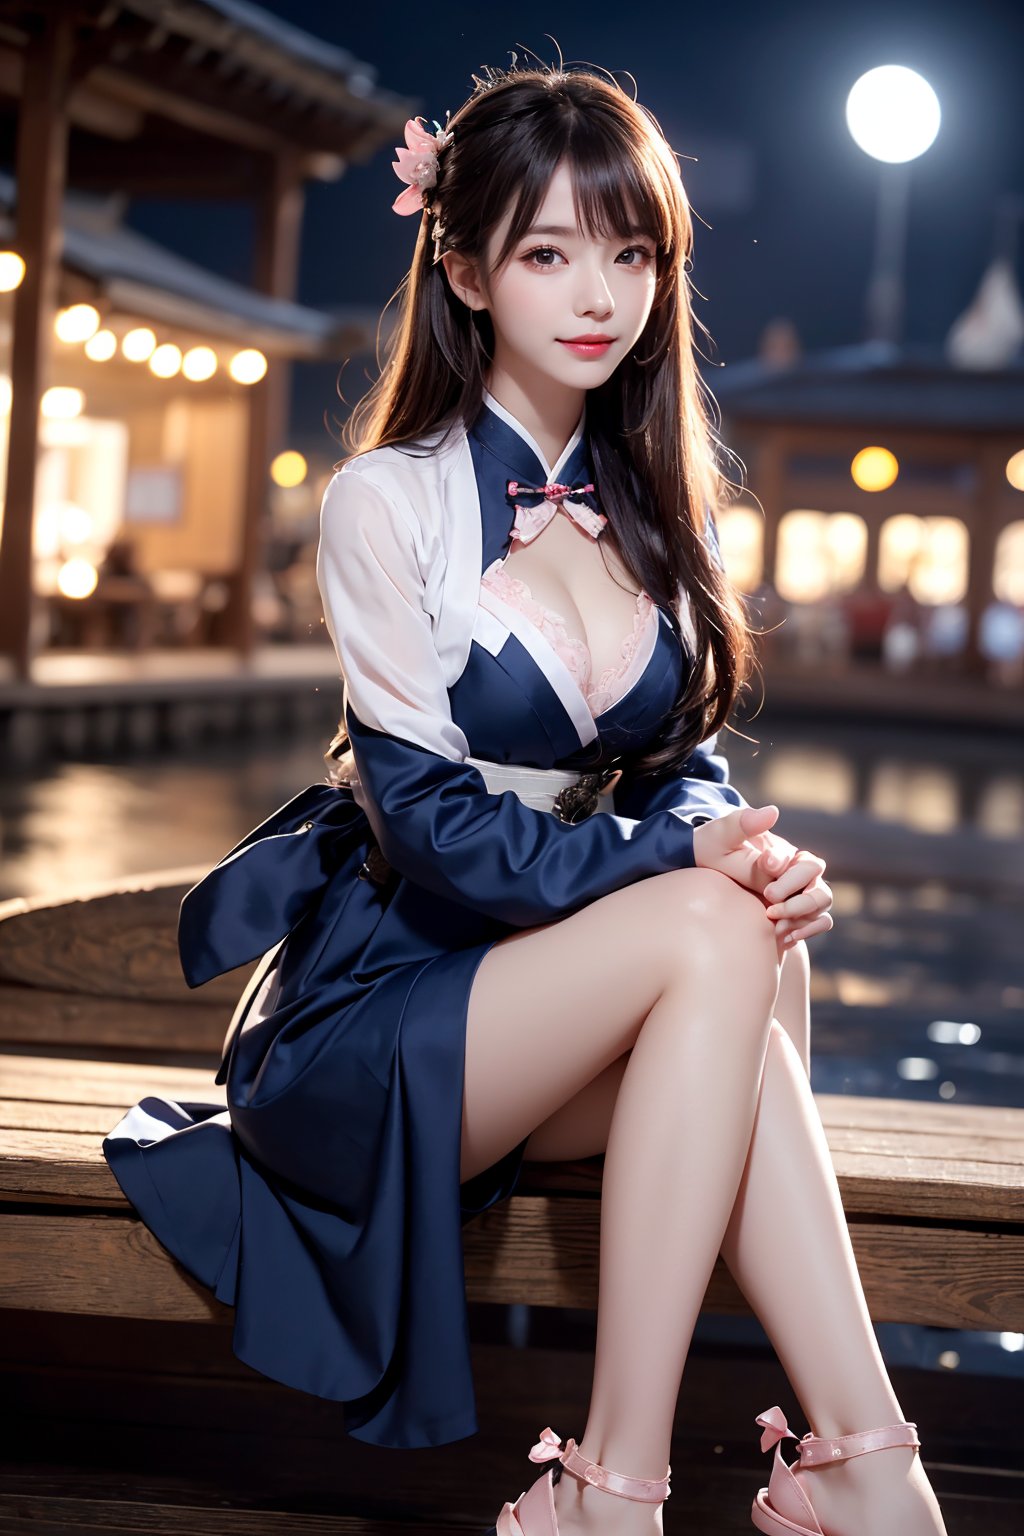 (((1girl:1.3,  solo))),  (a extremely pretty and beautiful milf:1.3),  (35 years old: 1.1),  (at Japanese lakeside:1.3,  at night:1.3,  under the Harvest Moon,  in the boat:1.3),  (sitting on the boat:1.3),  (grin smile:1.3),  (arms down between legs:1.3),  break, (mahogany up hair:1.3),  (Hair between eyes:1.3),  (medium-length hair:1.3),  bangs,  (hairpin:1.3),  dark brown eyes,  beautiful eyes,  princess eyes,  (Drooping eyes:1.2),  (slender:1.3),  ((small-medium breasts: 1.0 ) )),  ((sagging breasts:1.3))),  ((( disproportionate breasts;0.7)))),  (Breasts squeezed together:0.7,  cleavage:0.5 ),  (thin waist: 1.3 ),  (detailed beautiful girl: 1.4),  Parted lips,  (pink glossy lips:1.3),  (pale skin:1.3),  (beautiful clean skin:1.3),  ((Perfect Female Body)),  Perfect Anatomy,  Perfect Proportions,  (most pretty and beautiful J-POP idol face: 1.3),  (a extremely cute and beautiful K-POP idol face:1.3),  (oval face:1.3),  (happy emotion:1.3),  (happy expression:1.3),  (closed mouth: 1.3 ),  (4fingers and thumb :1.5),  (perfect ratio human hands:1.5), BREAK, (wearing a Korean Clothes1.3),  (Hanbok clothes:1.3),  (Dark blue hanbok:1.3,  Hair ornament:1.3,  Black sandals:1.3),  detailed clothes, BREAK, (Realistic,  Photorealistic: 1.37),  (Masterpiece,  Best Quality: 1.2),  (Ultra High Resolution: 1.2),  (RAW Photo: 1.2),  (Face Focus: 1.2),  (Ultra Detailed CG Unified 8k Wallpaper: 1.2),  (Hyper Sharp Focus: 1.5),  (Ultra Sharp Focus: 1.5),  (Beautiful pretty face: 1.3) (professional photo lighting:1.3),  ,  (super detailed background,  detail background: 1.3), miku,<lora:EMS-179-EMS:0.300000>,<lora:EMS-1093-EMS:0.500000>,<lora:EMS-187988-EMS:0.500000>